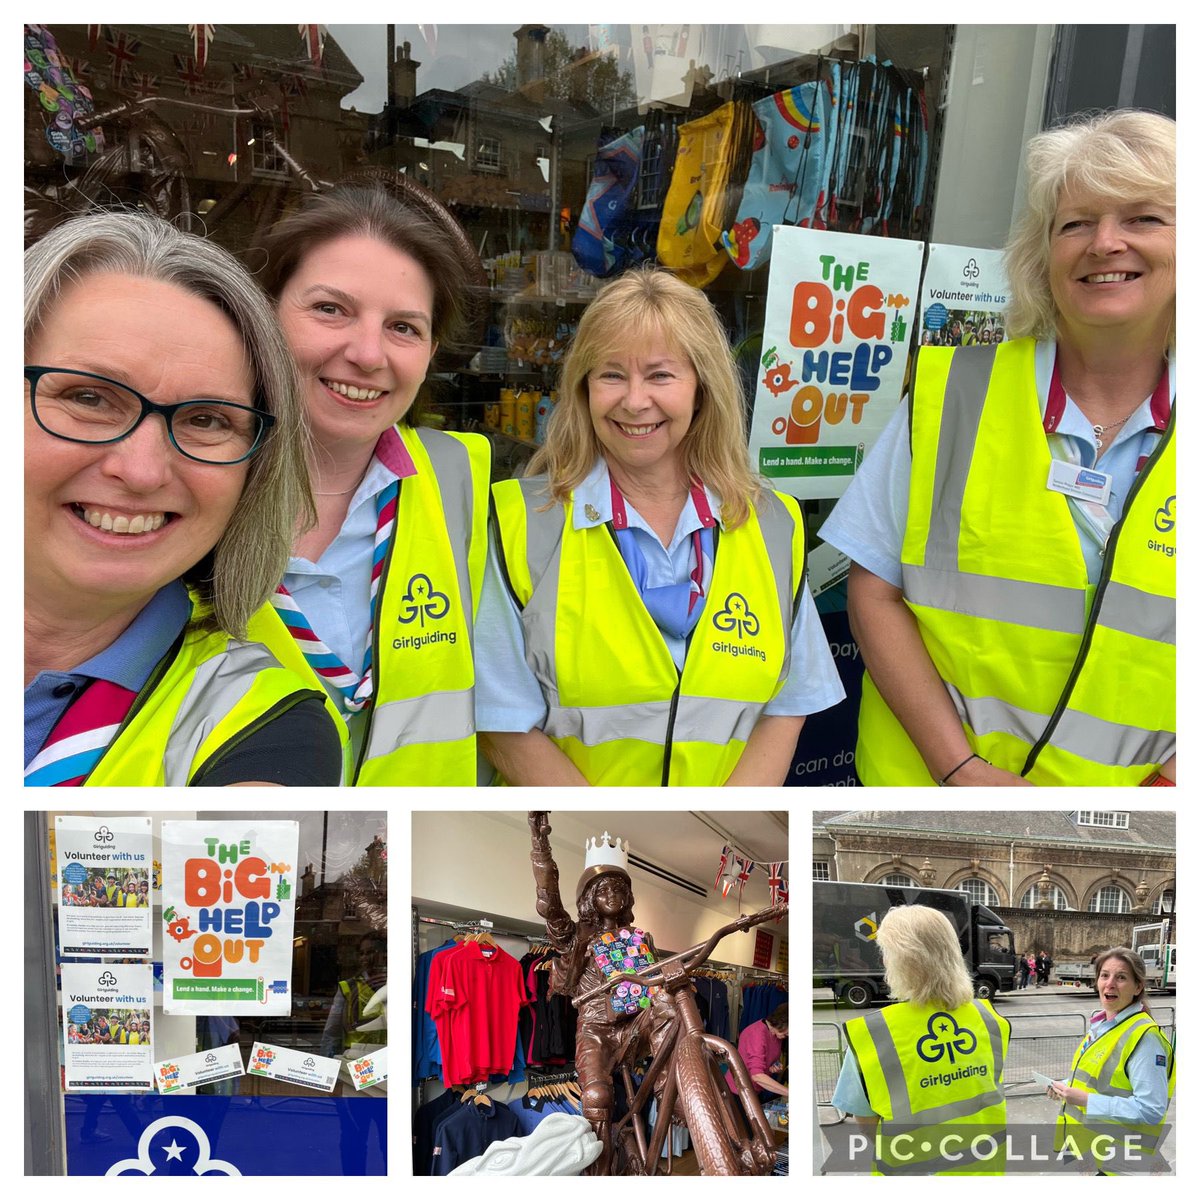 Amazing day with @Chief_Guide @jo_lovell celebrating @TheBigHelpOut23 at @Girlguiding HQ today!! Still time to get involved and sign up as a volunteer 👉girlguiding.org.uk/volunteer